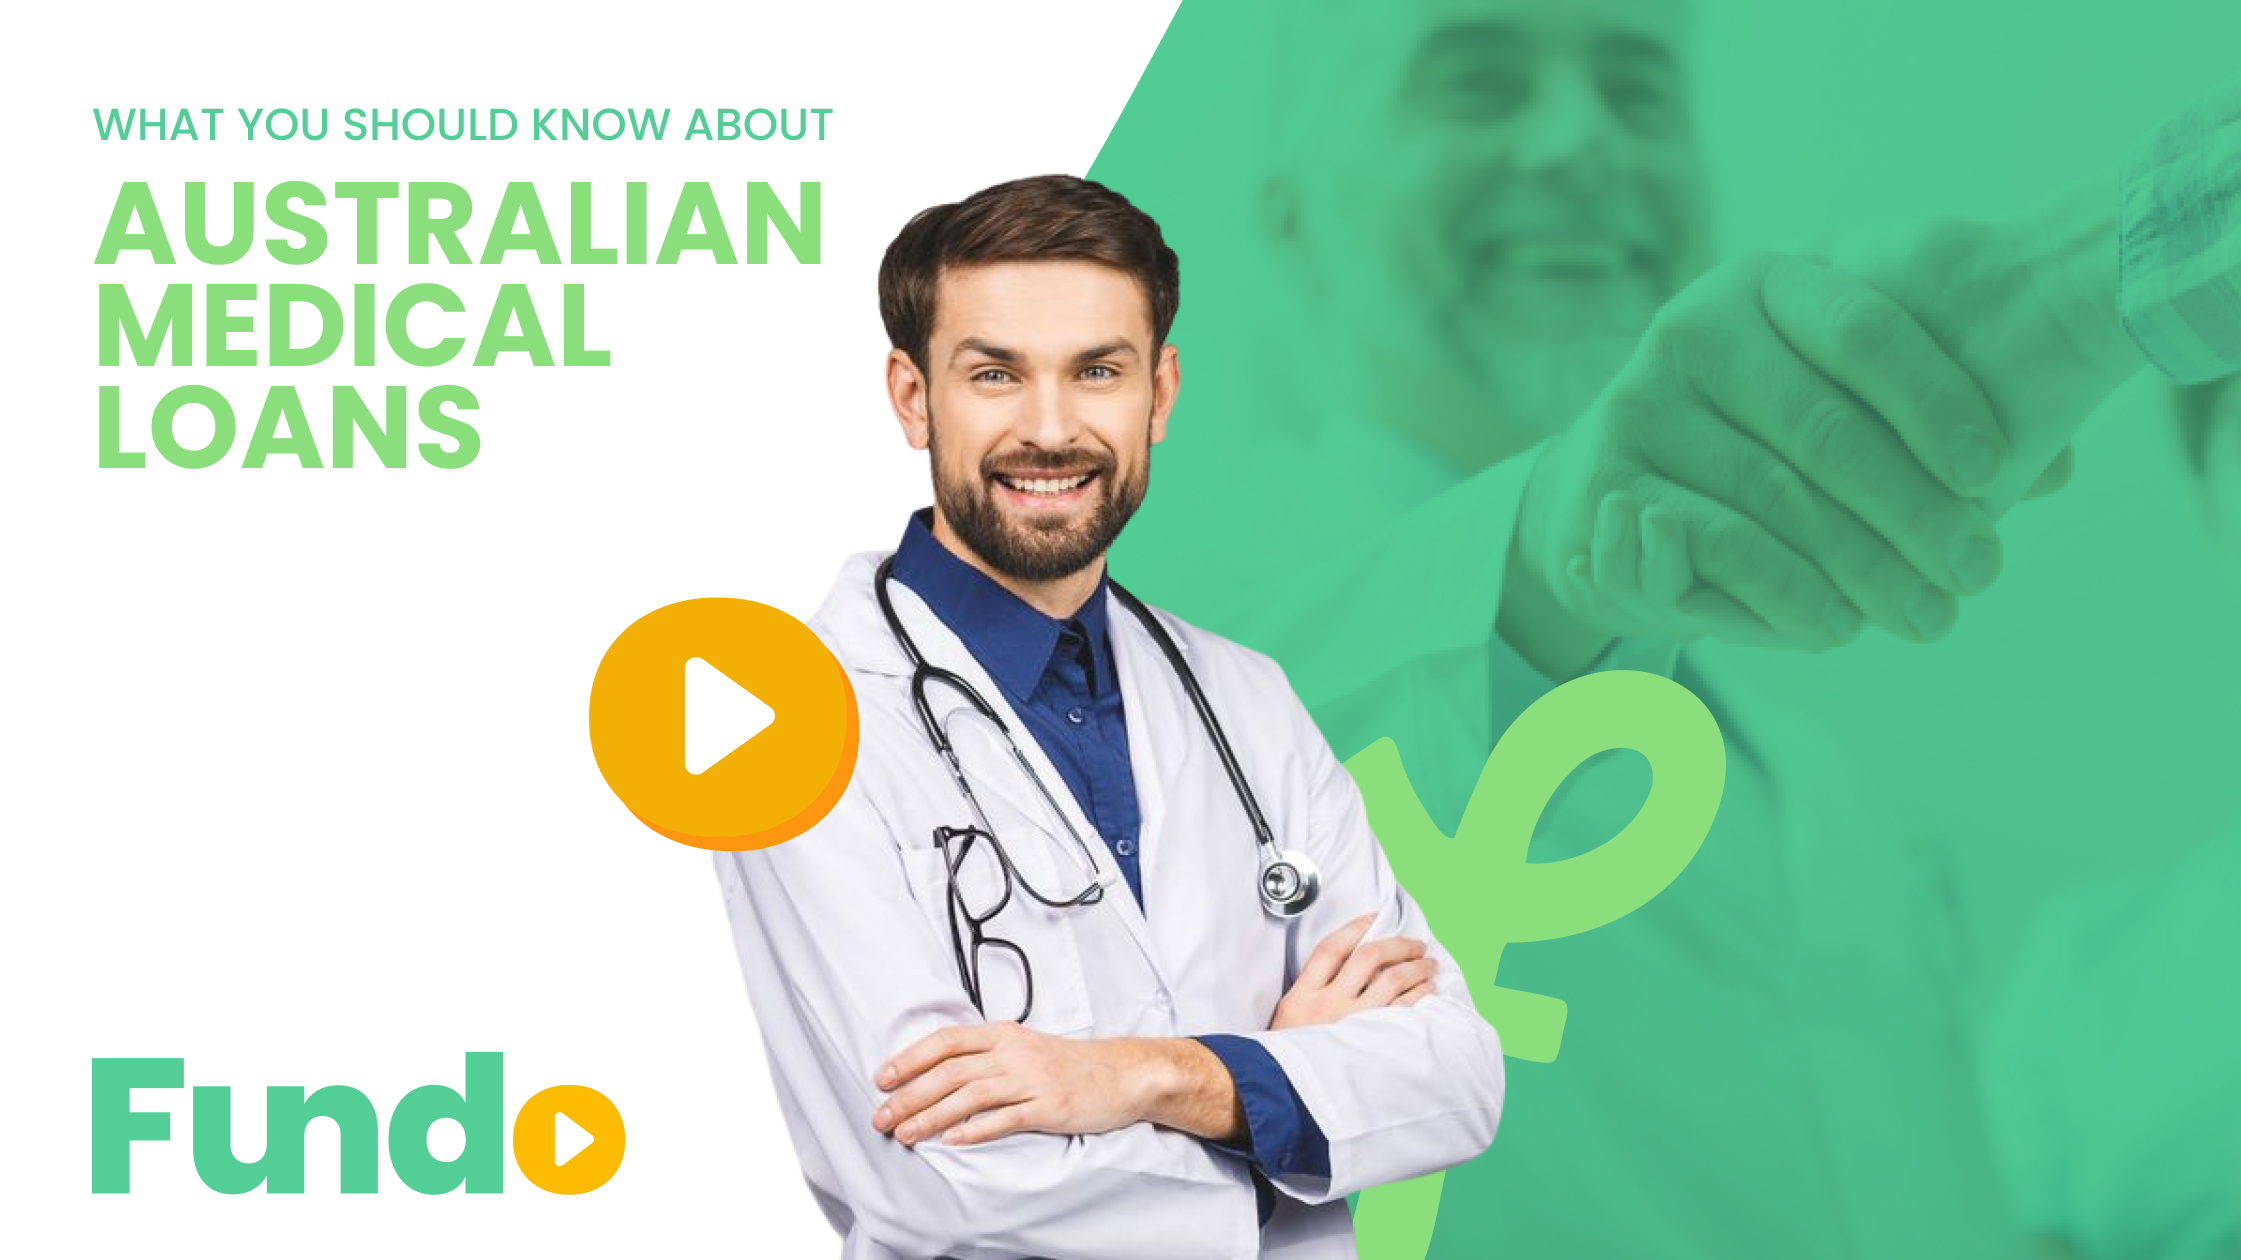 What you should know about Australian Medical Loans